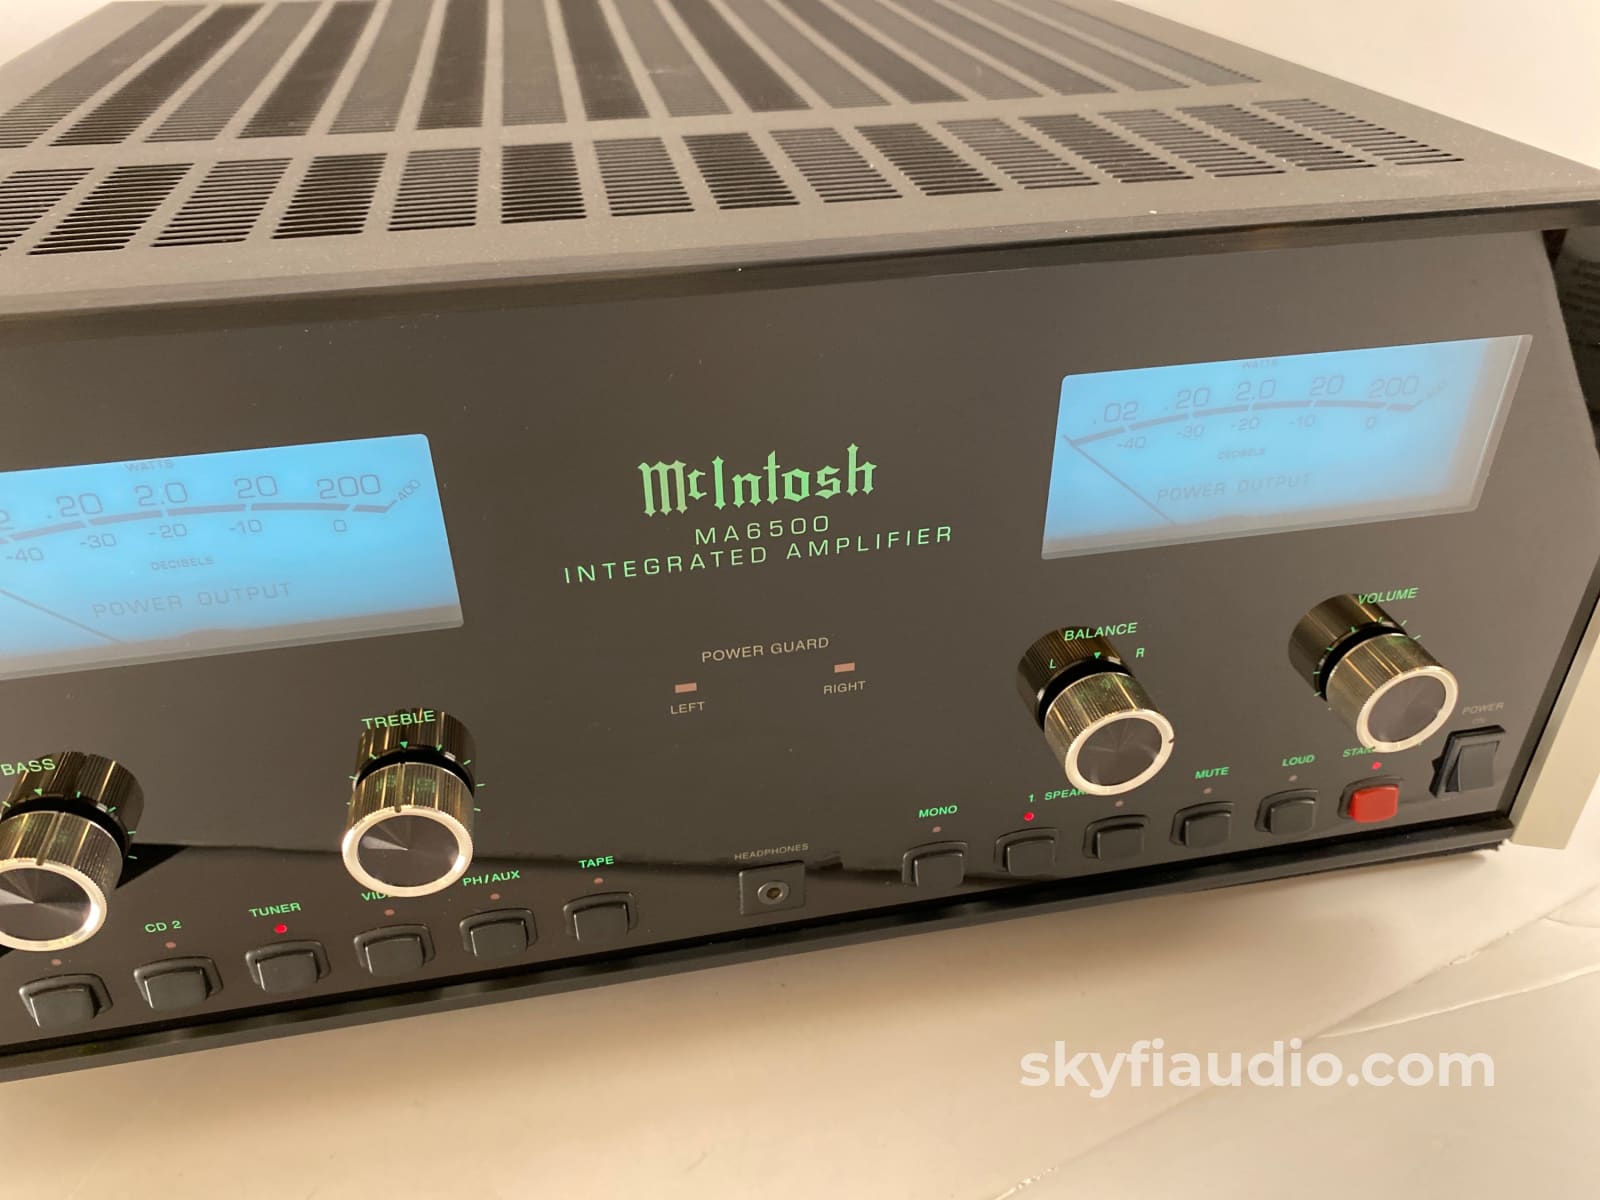 Mcintosh Ma6500 Integrated Amplifier - Excellent Condition And Refreshed